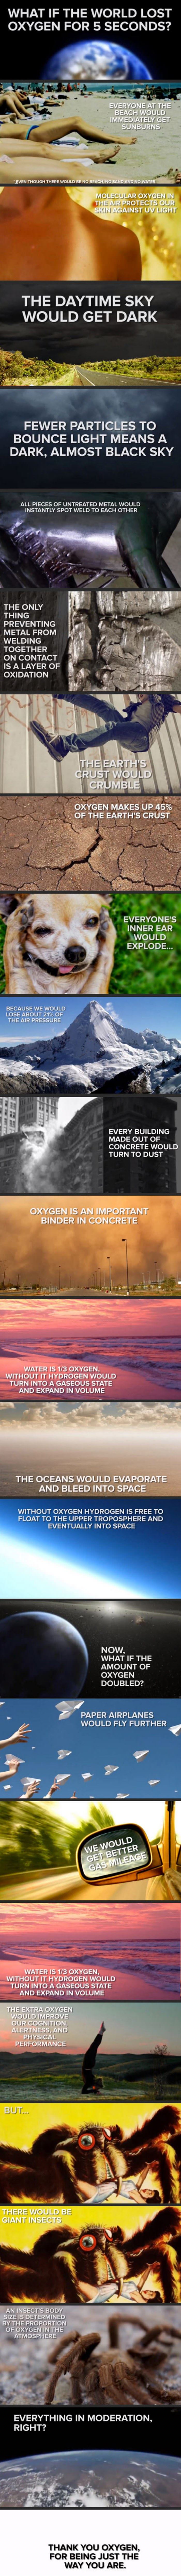 oxygen funny picture